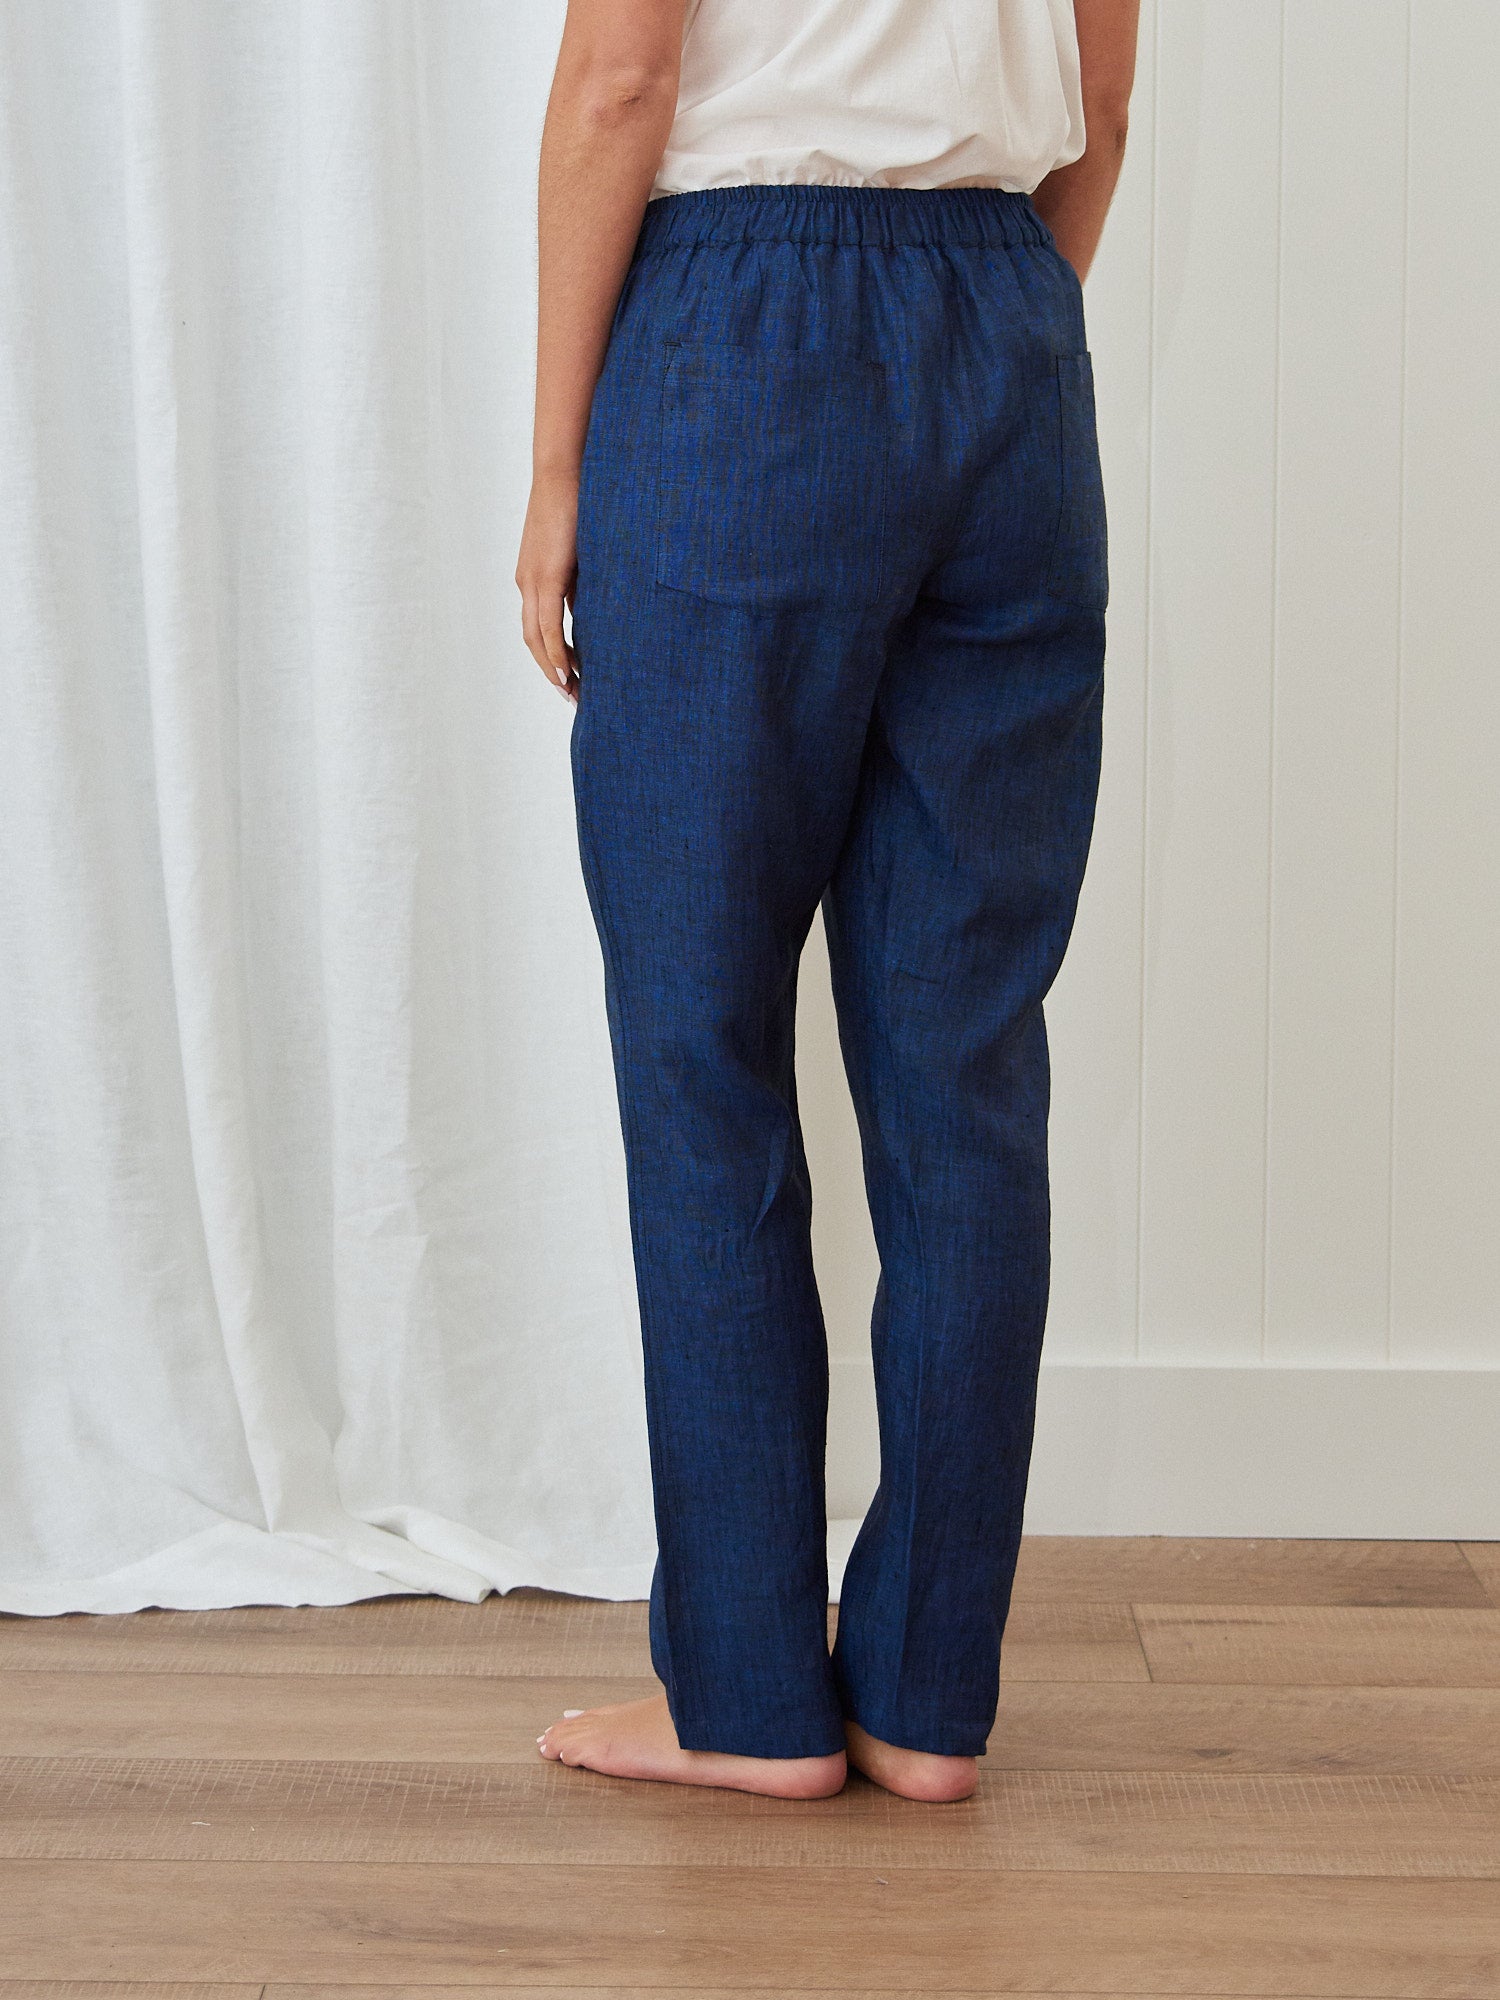 https://www.wallacecotton.com/content/products/voyager-linen-pants-blue-chambray-4-9174.jpg?width=1500